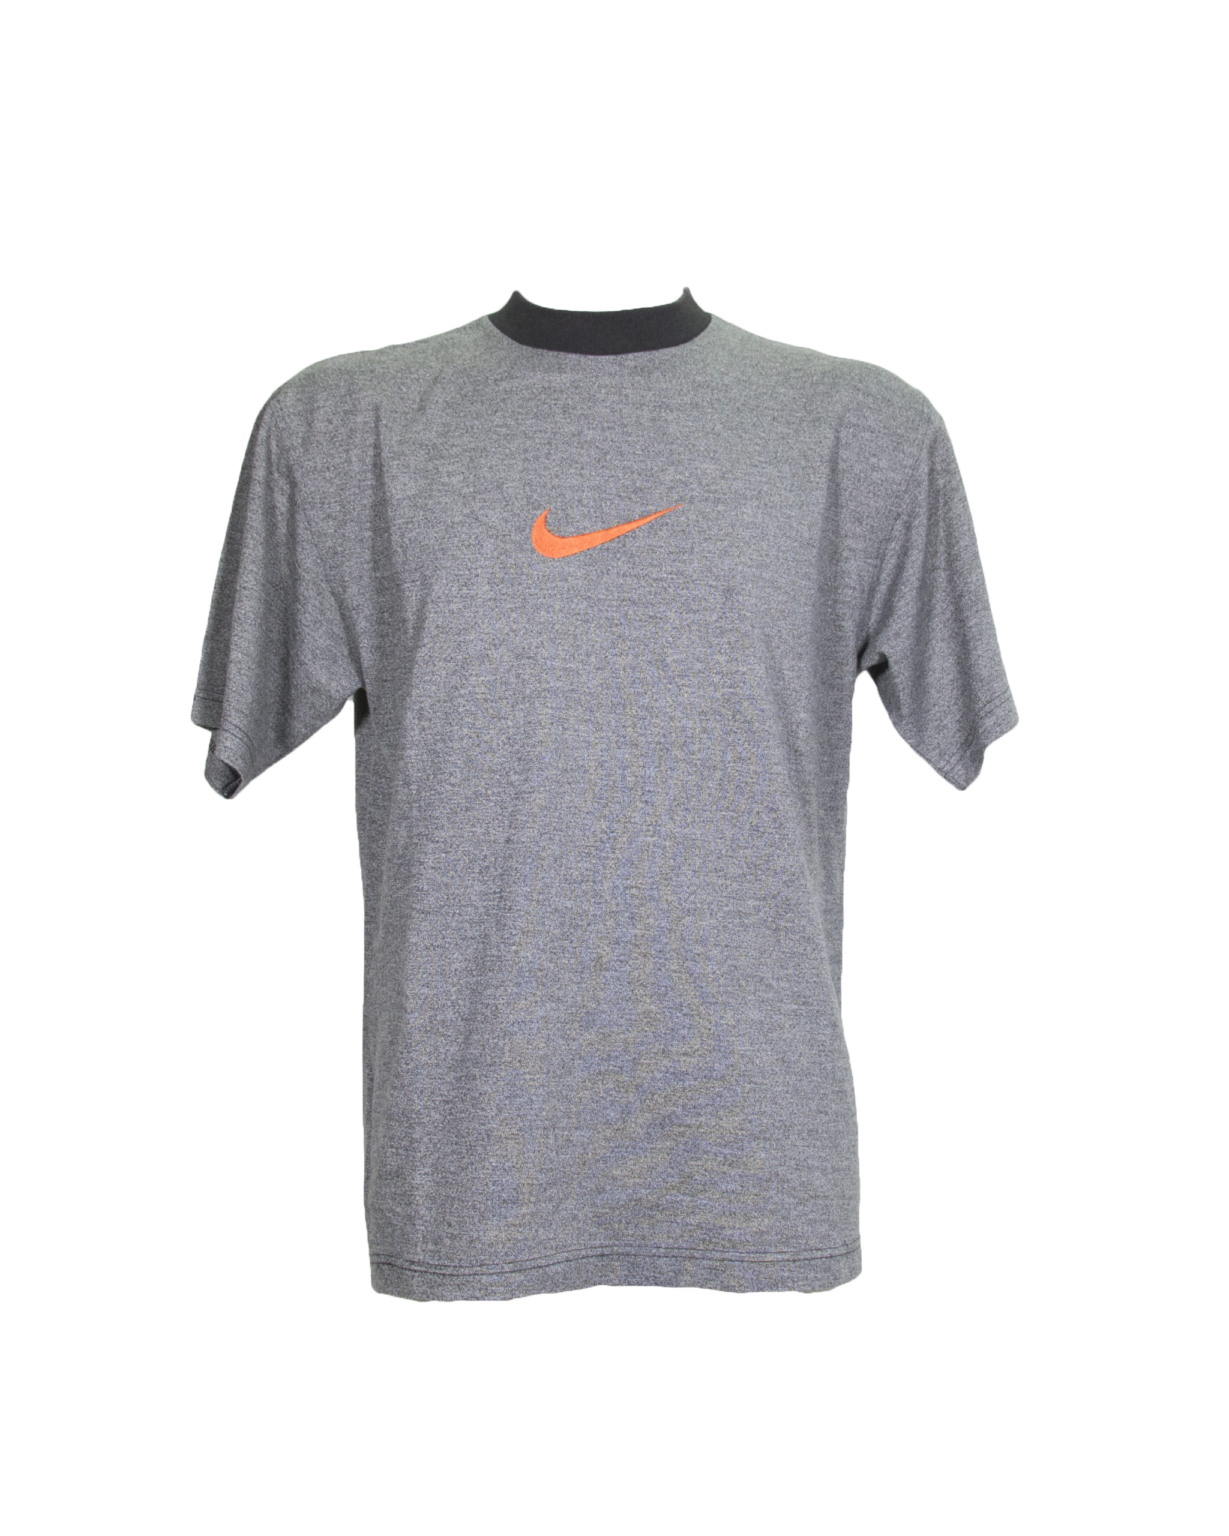 T-shirt-sportive-firmate-Sport-branded-t-shirts_NORMAL_11901-scaled